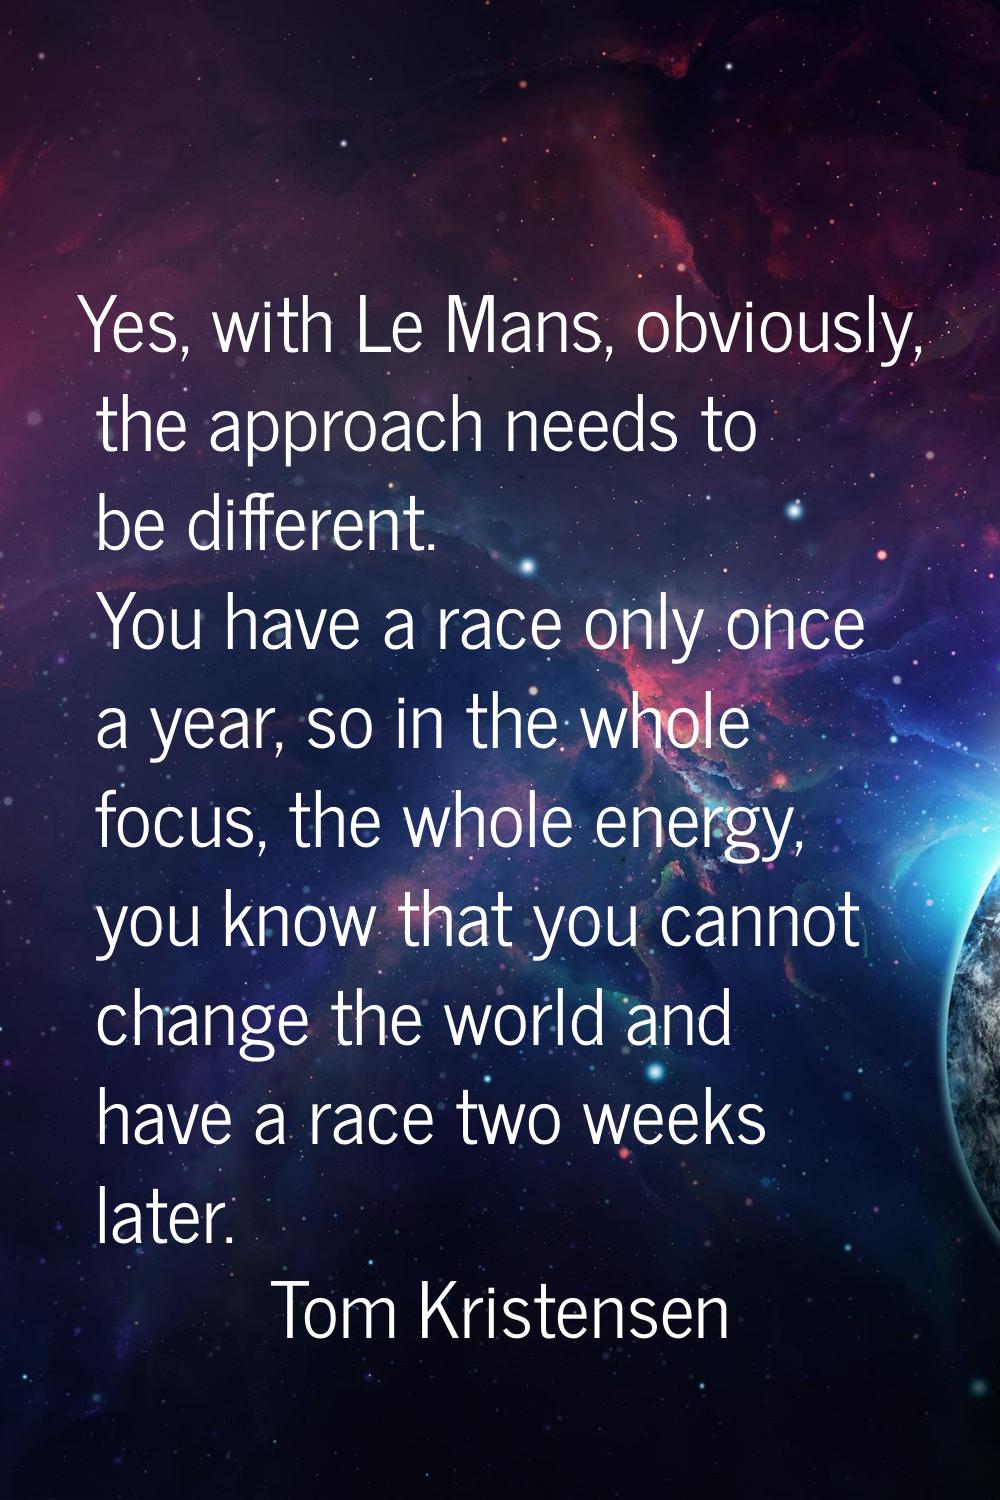 Yes, with Le Mans, obviously, the approach needs to be different. You have a race only once a year,